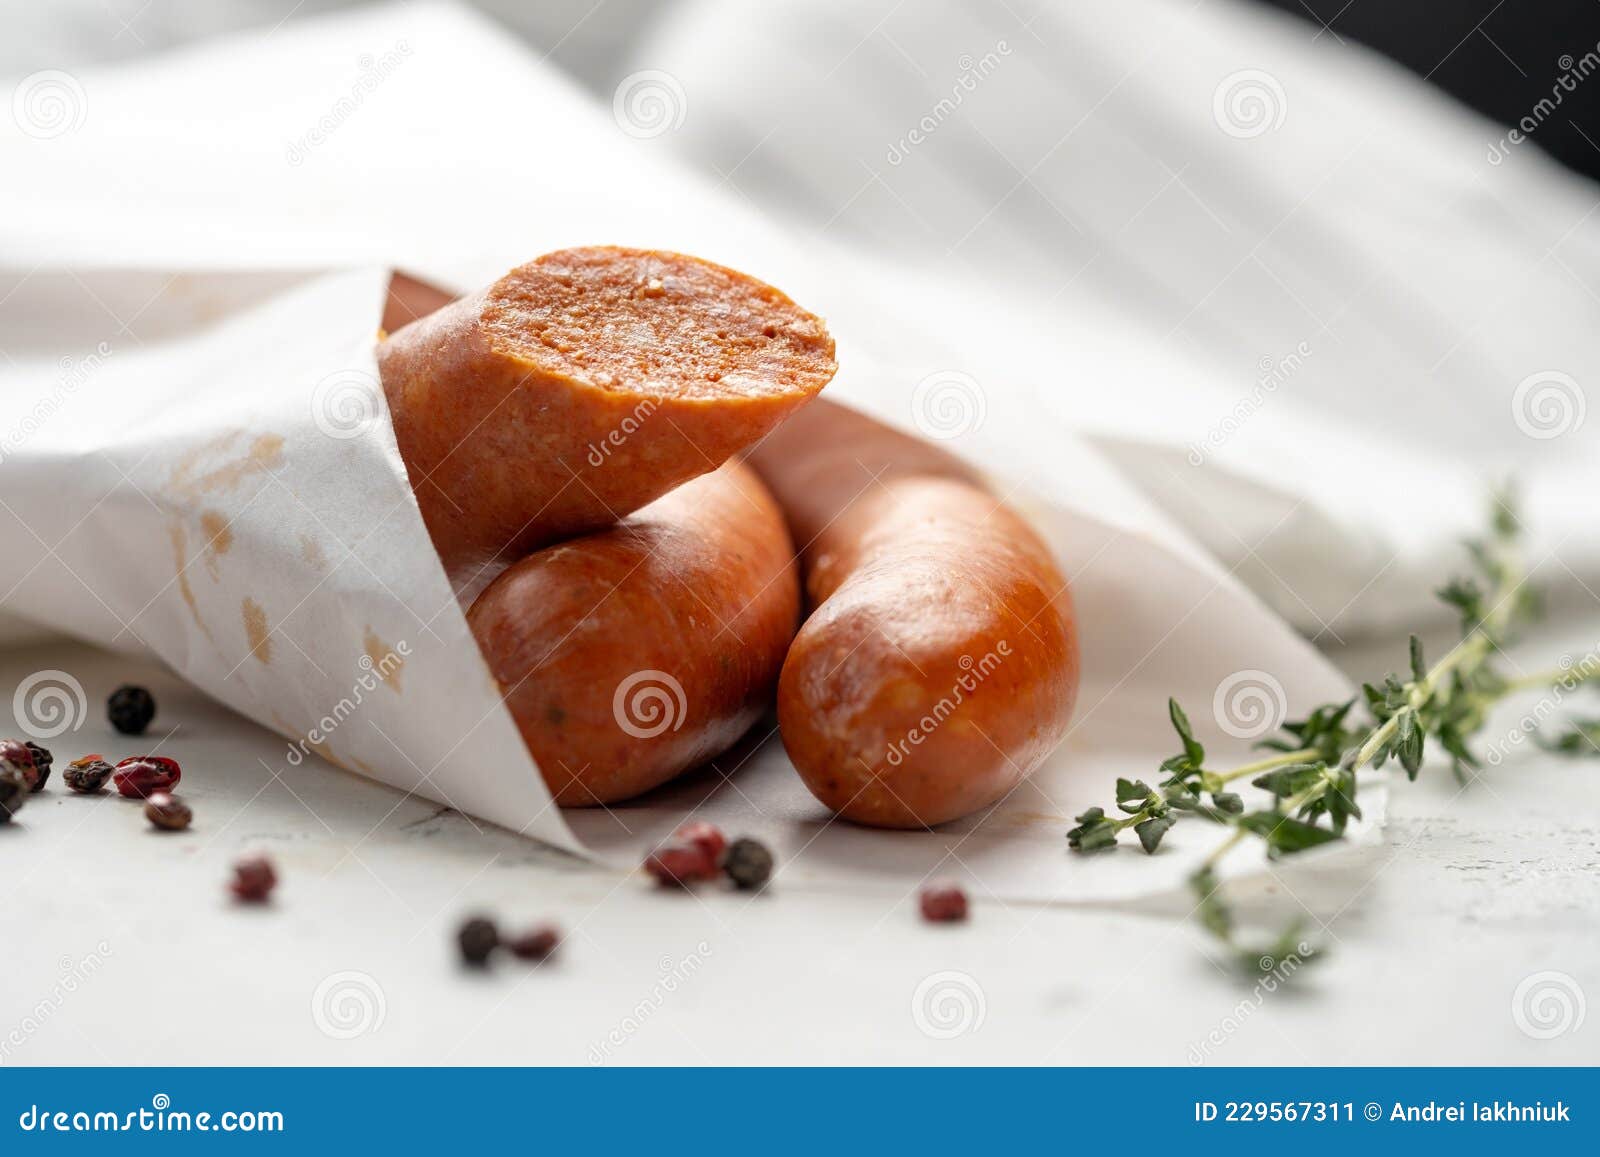 traditional spanish chistorra sausages wrapped in paper with pepper